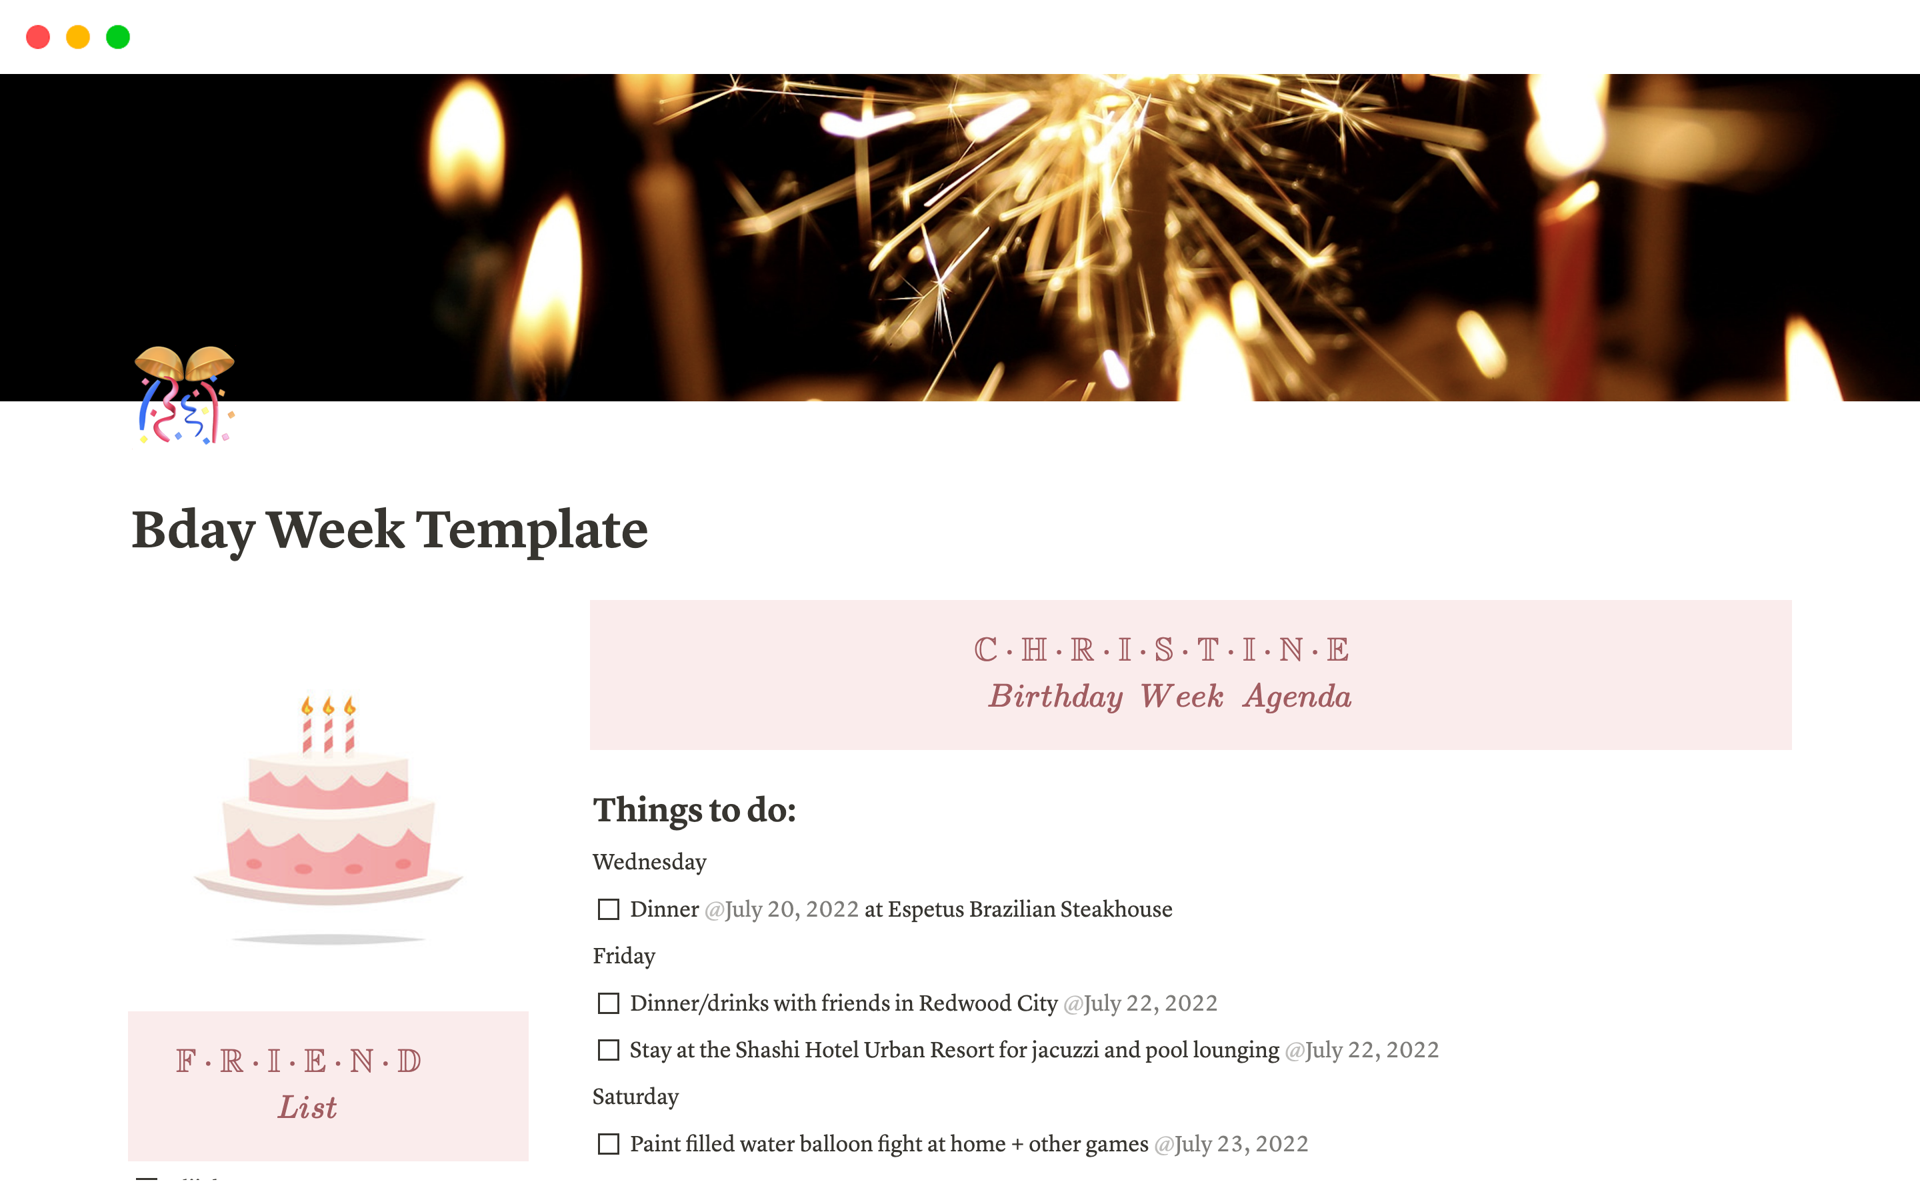 Template for organizing activities for a friend's birthday week with friends.